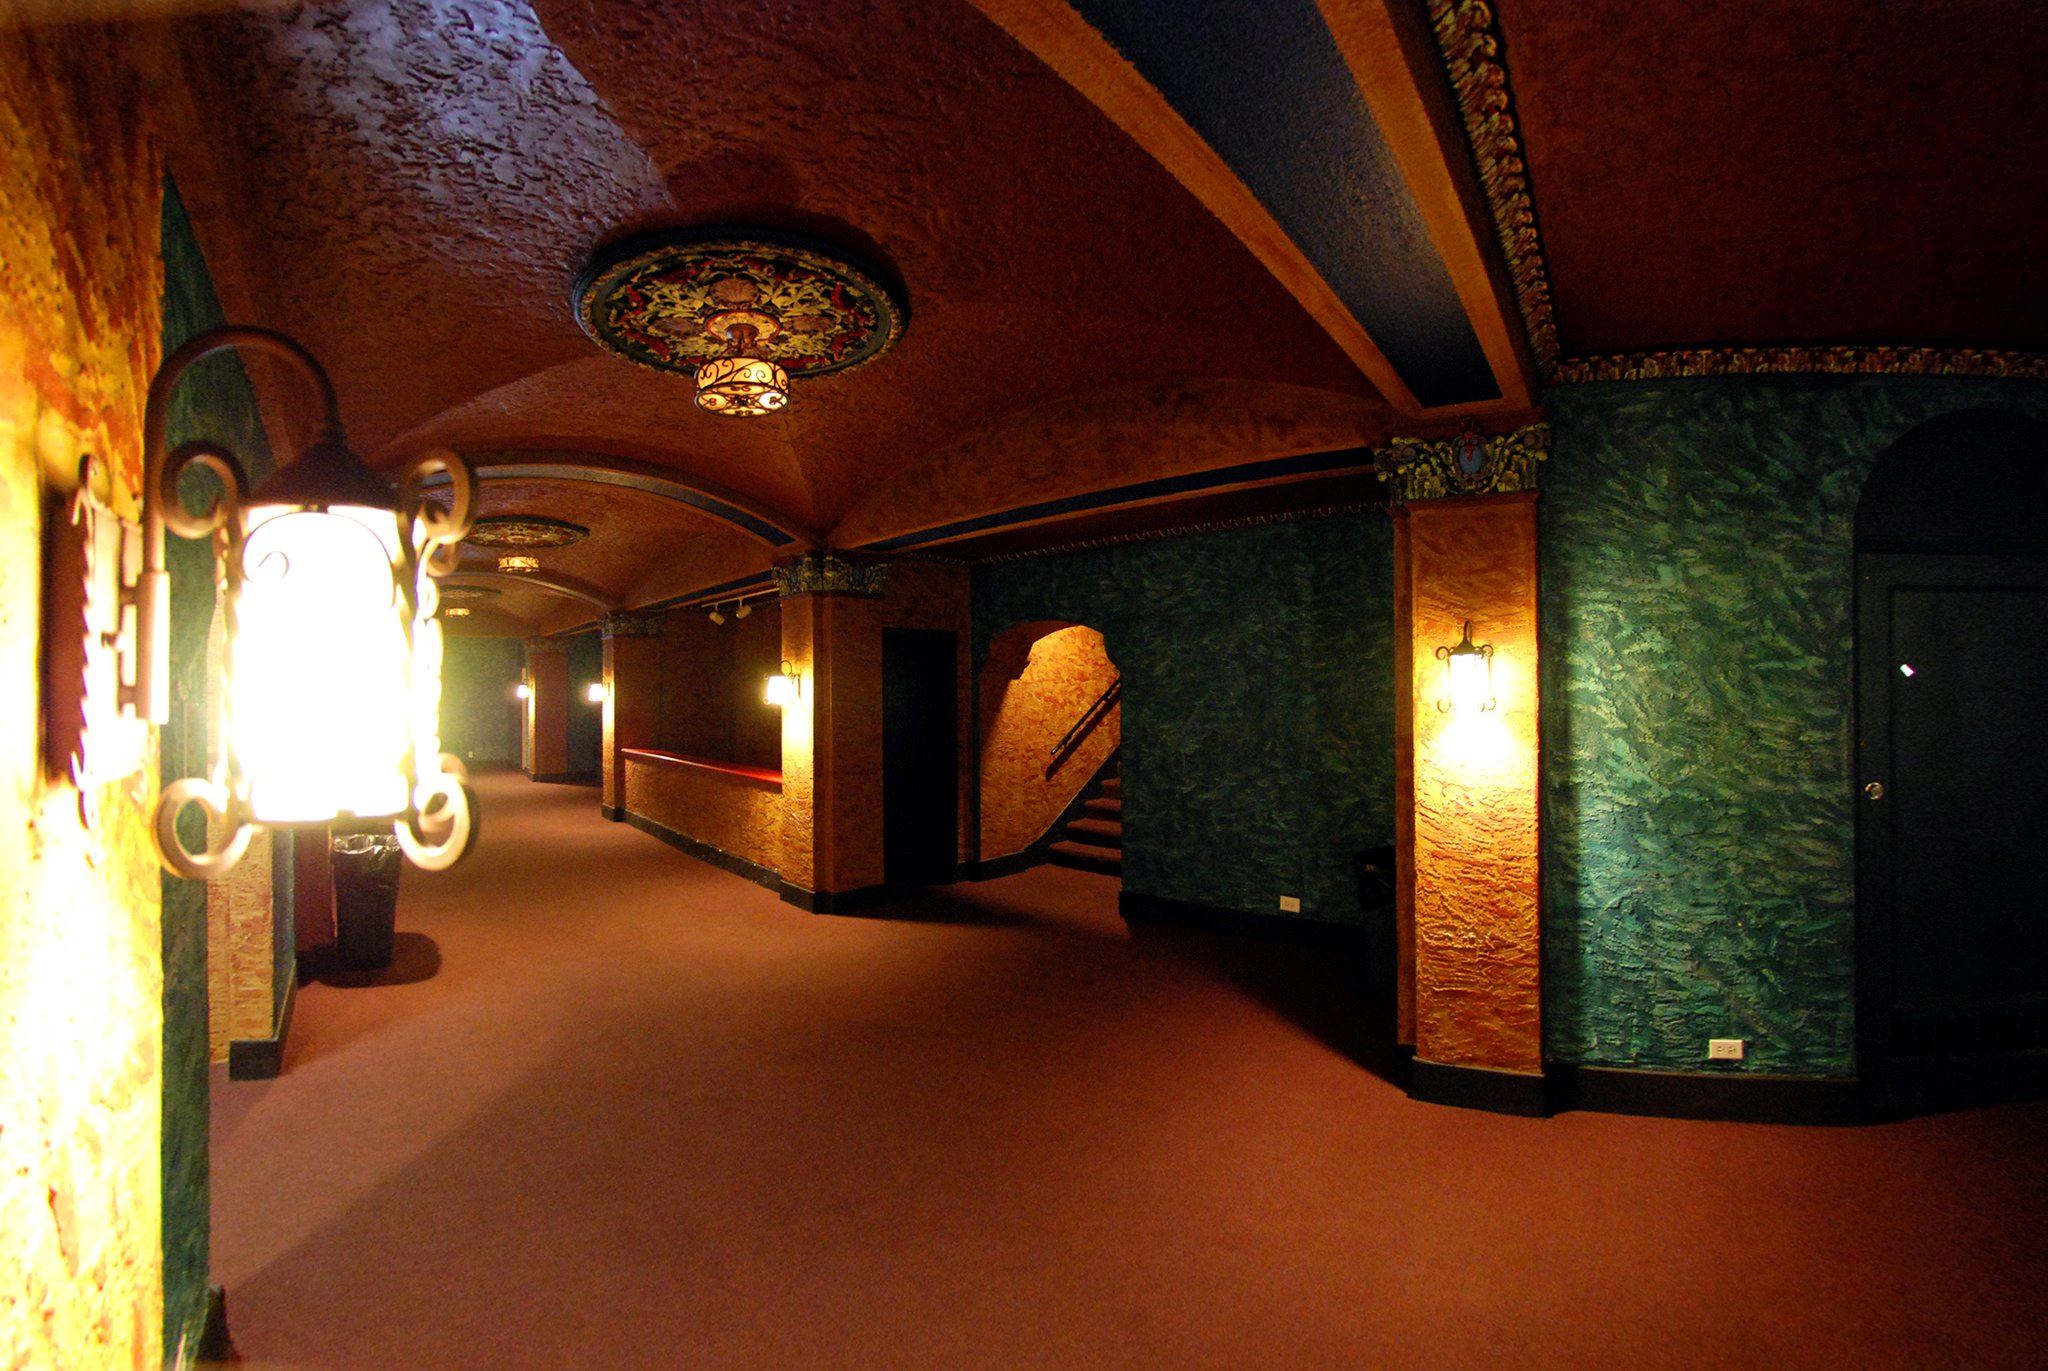 Uptown Theater - 7